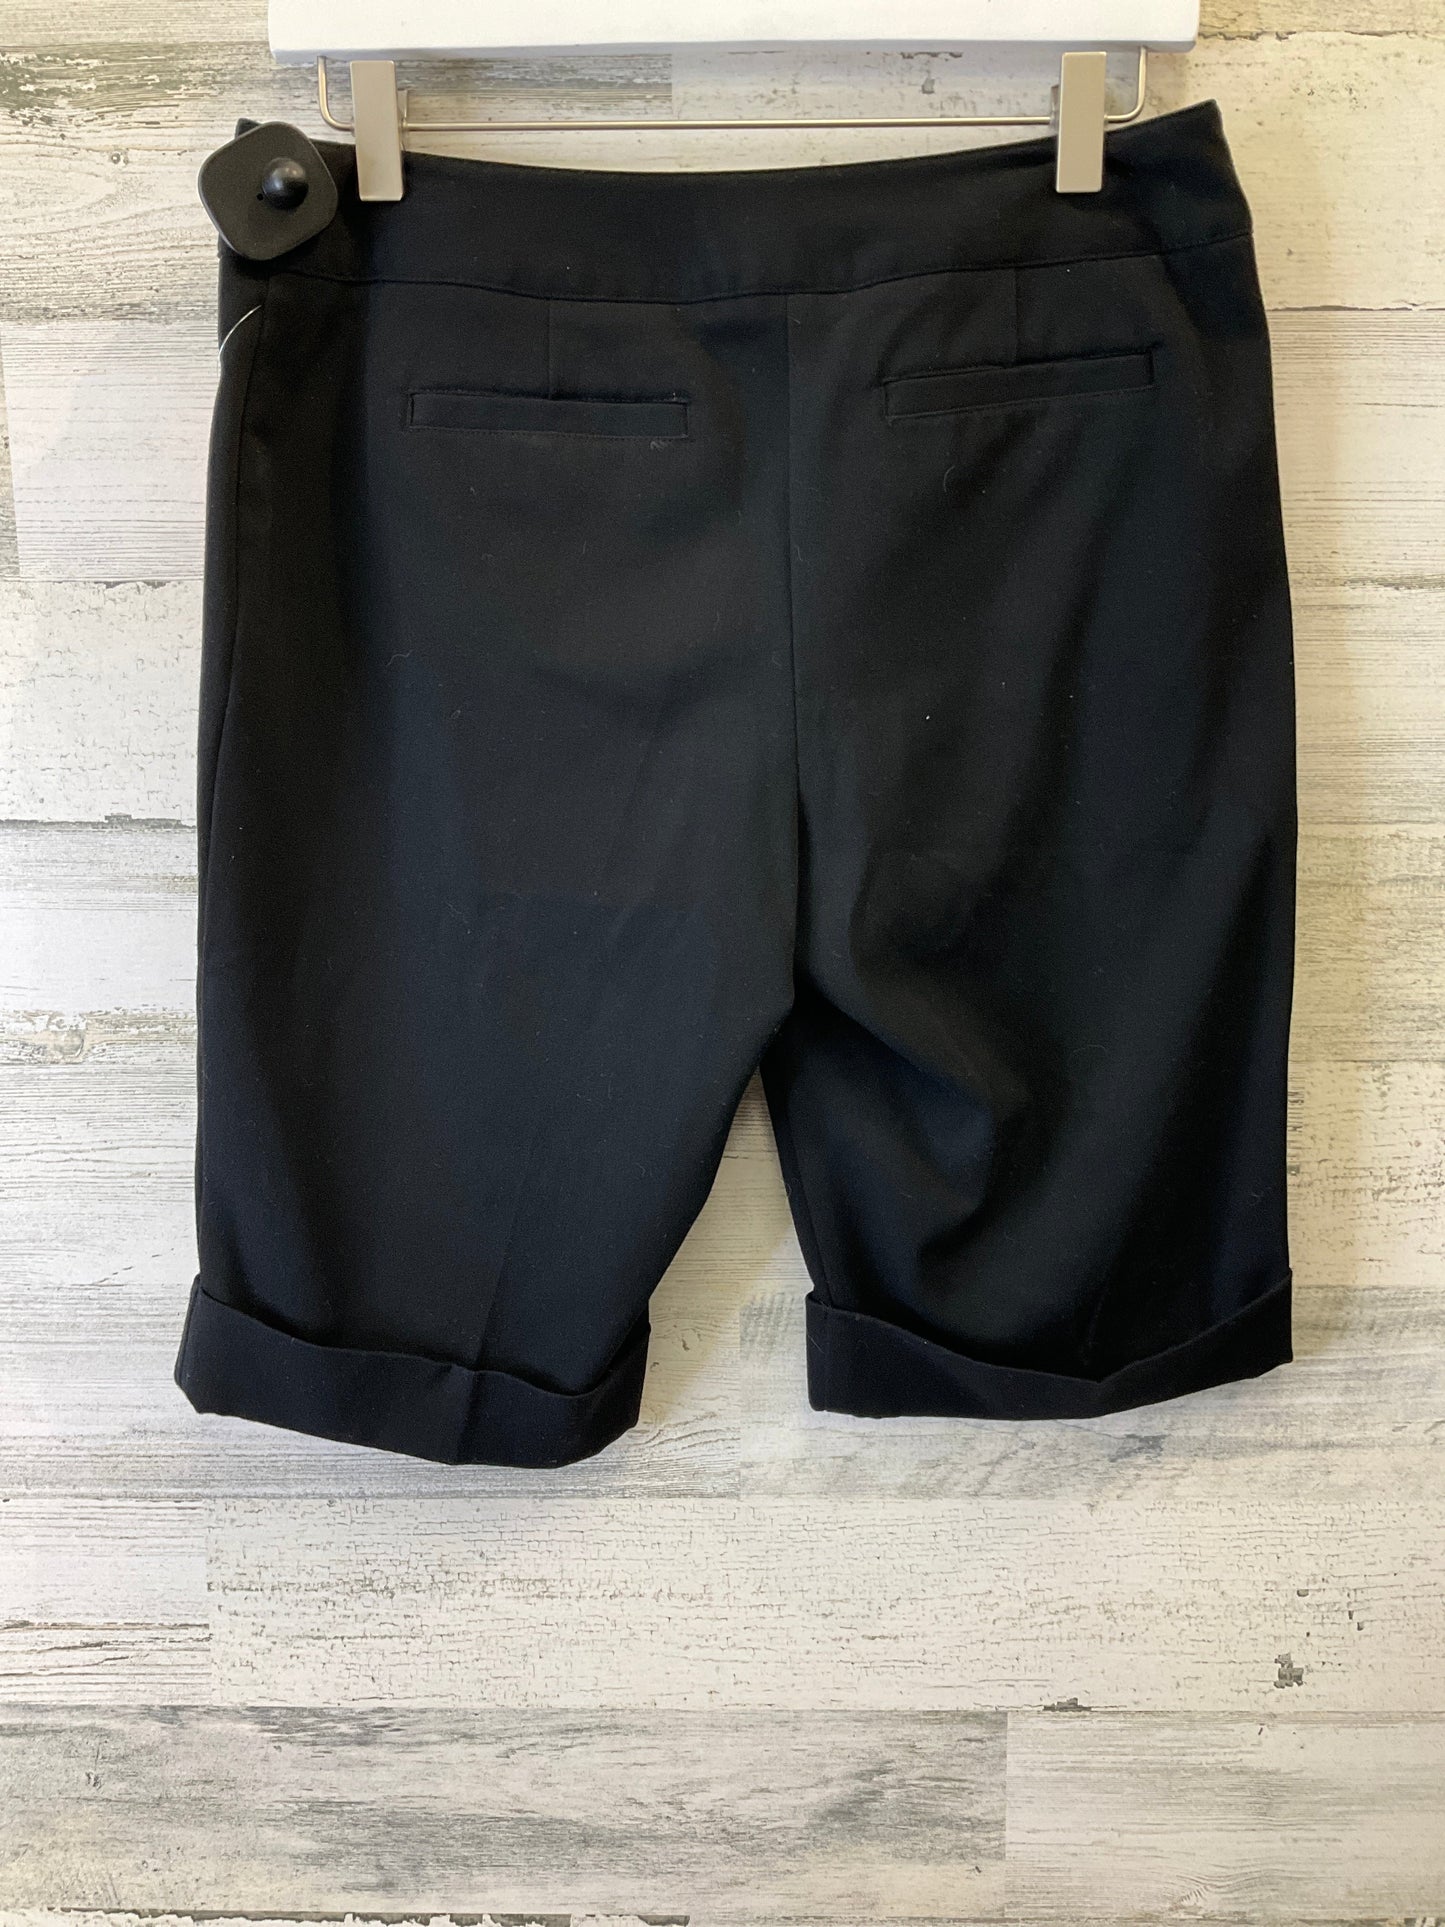 Black Shorts Style And Company, Size 4